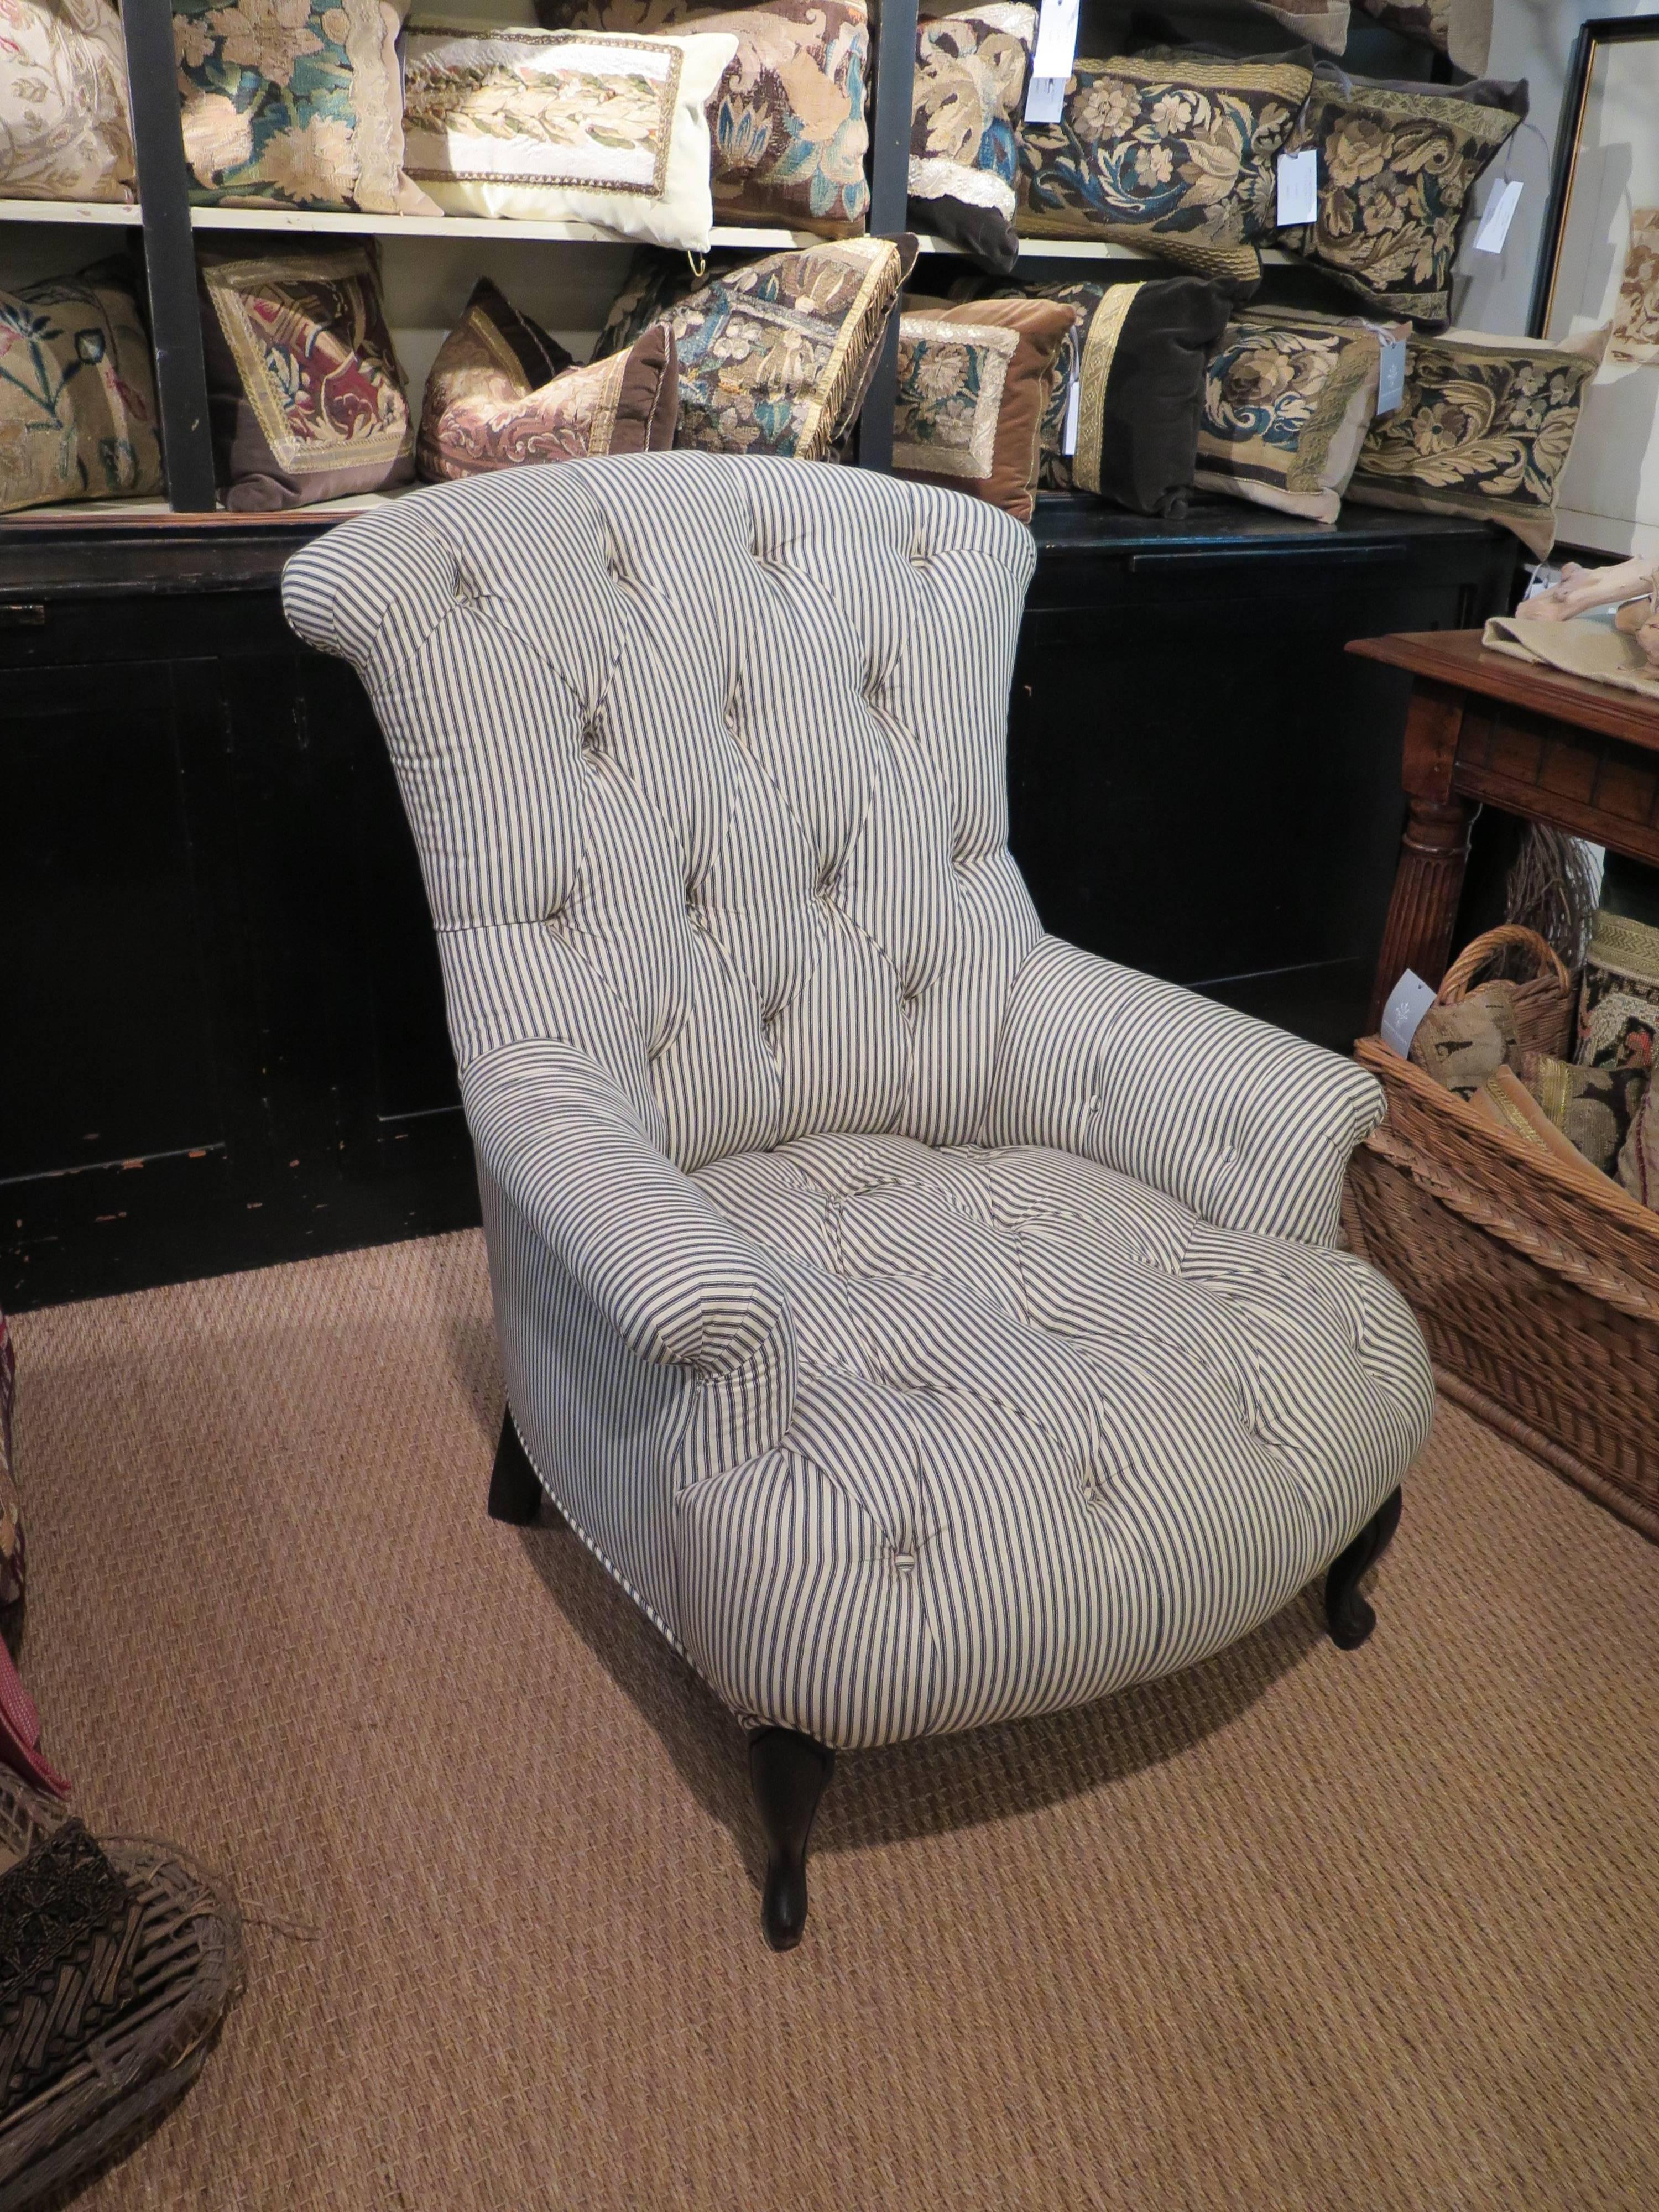 Newly upholstered armchair with Classic striped pattern on antique French frame. The chair is 37" tall to the top of the back. The seat is 24" deep, but the chair measures 36" deep to the wall.
     